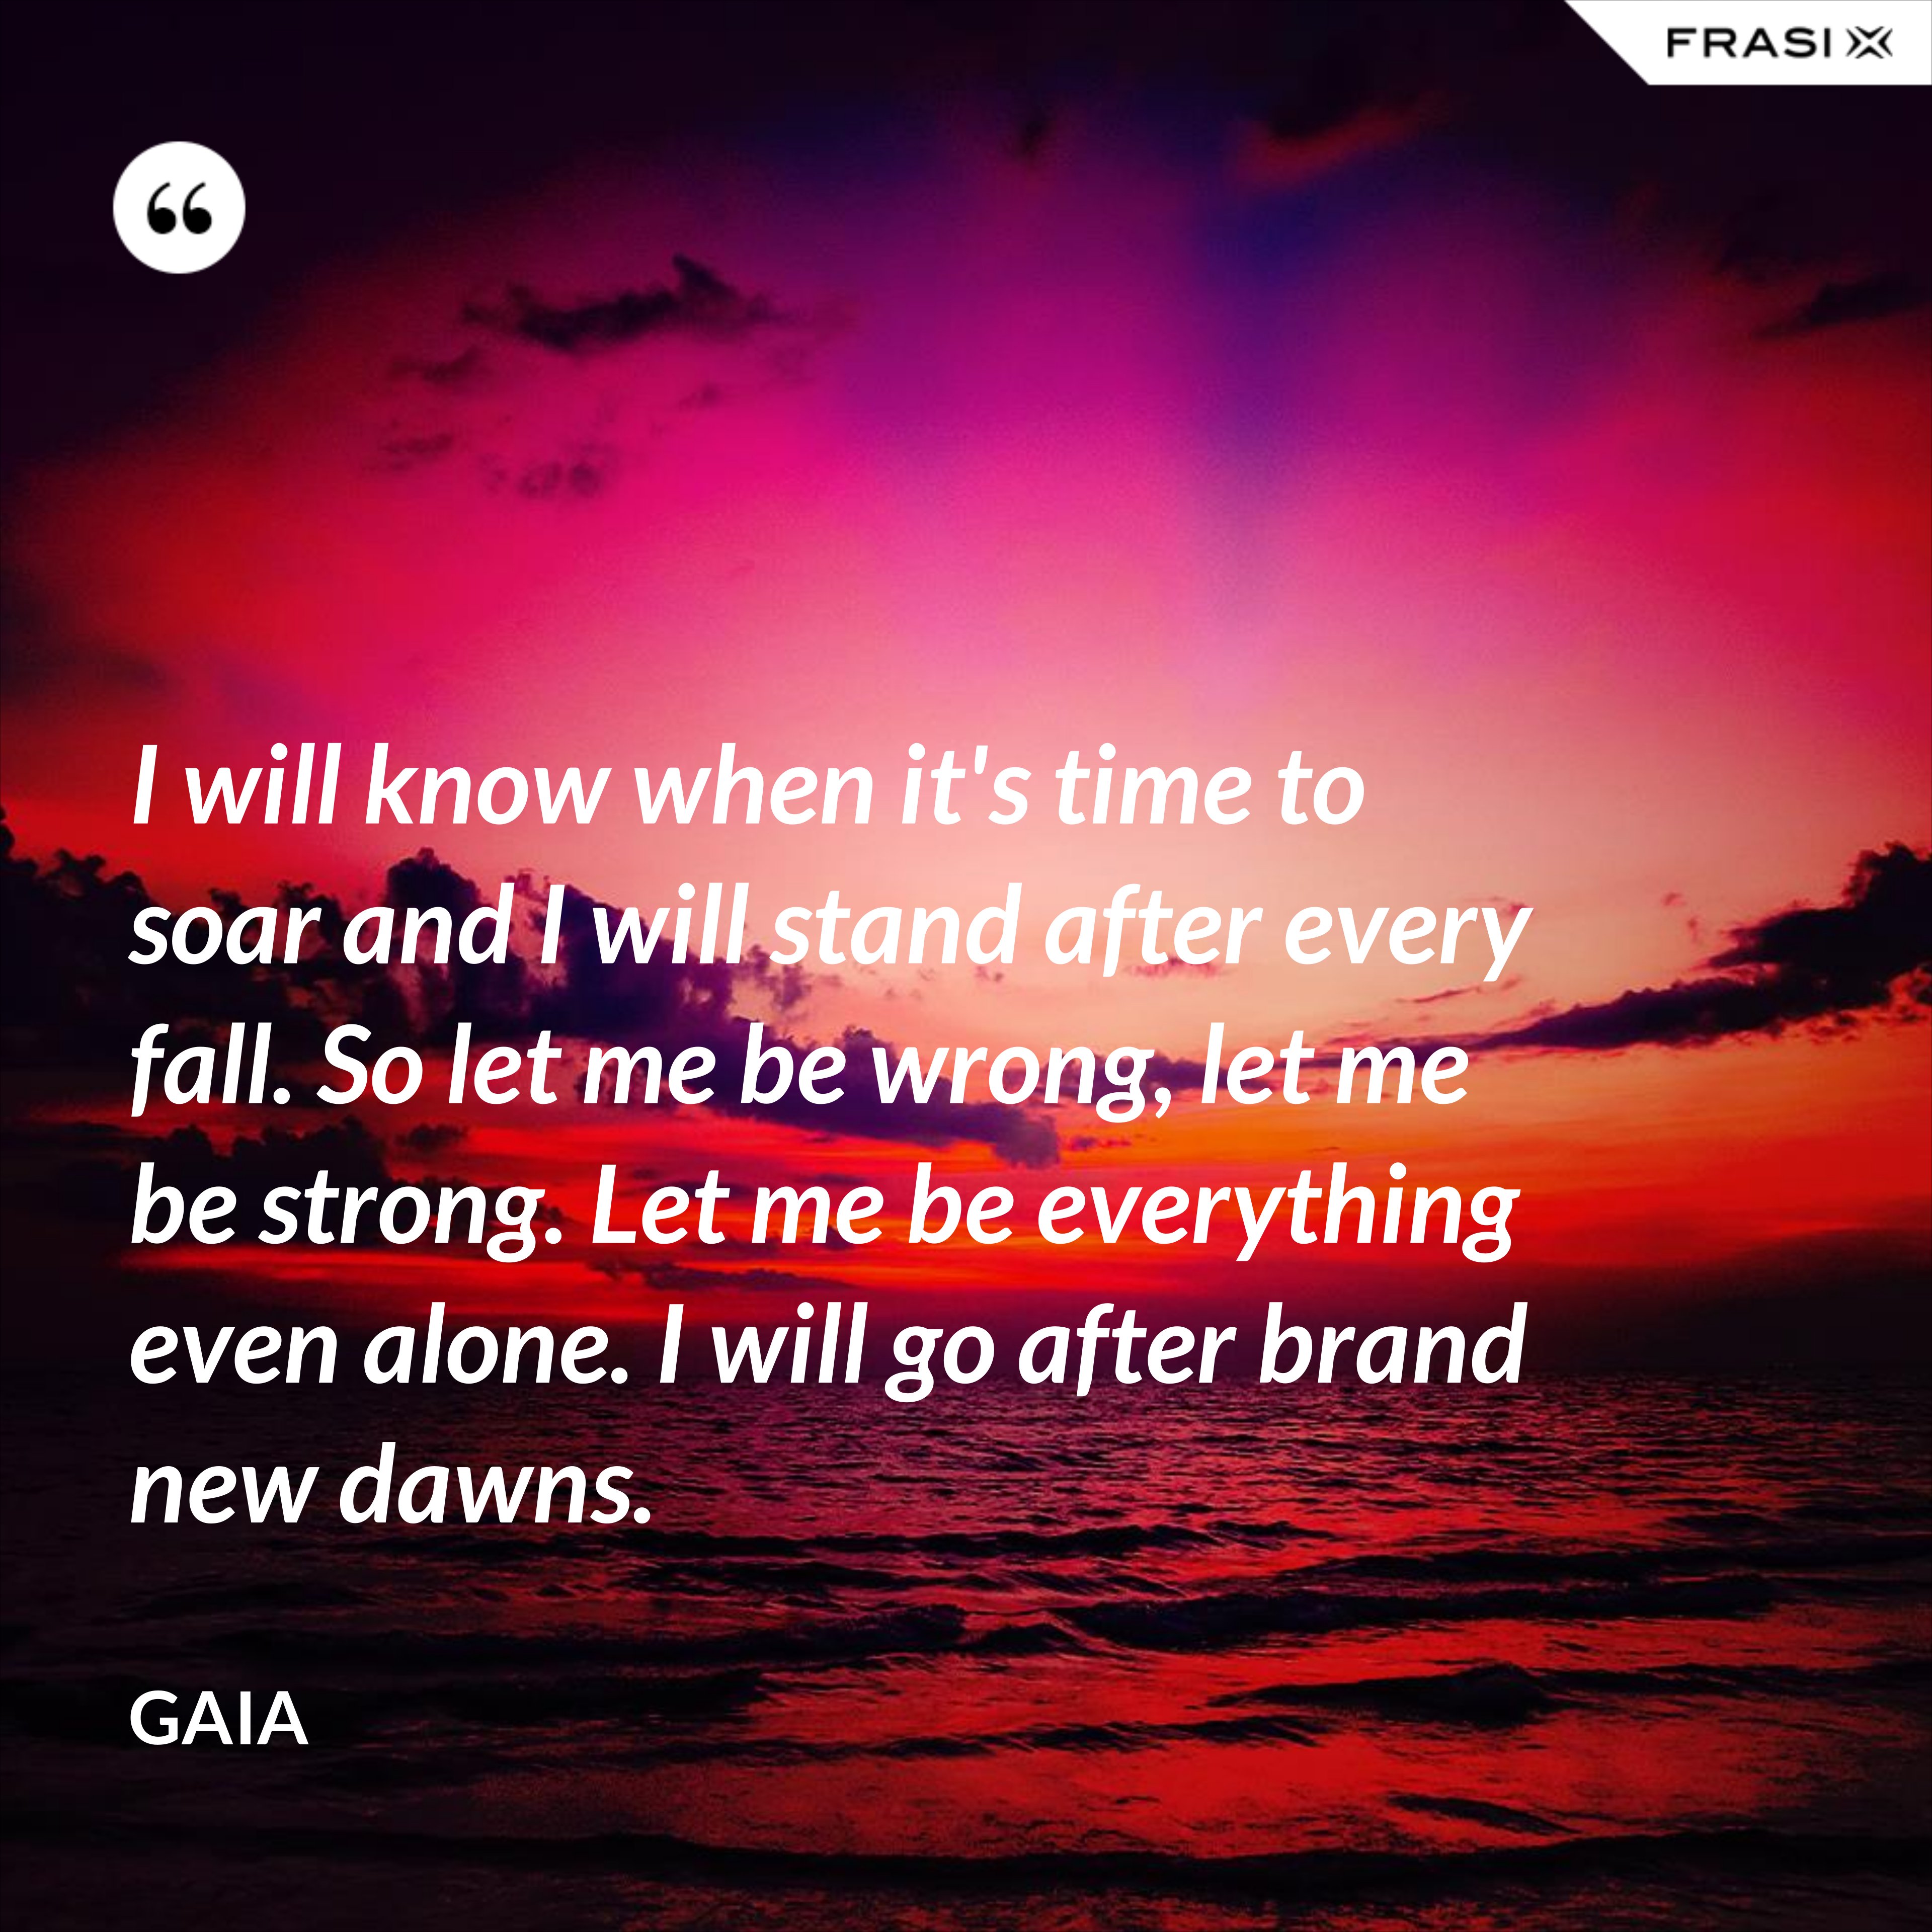 I will know when it's time to soar and I will stand after every fall. So let me be wrong, let me be strong. Let me be everything even alone. I will go after brand new dawns. - Gaia